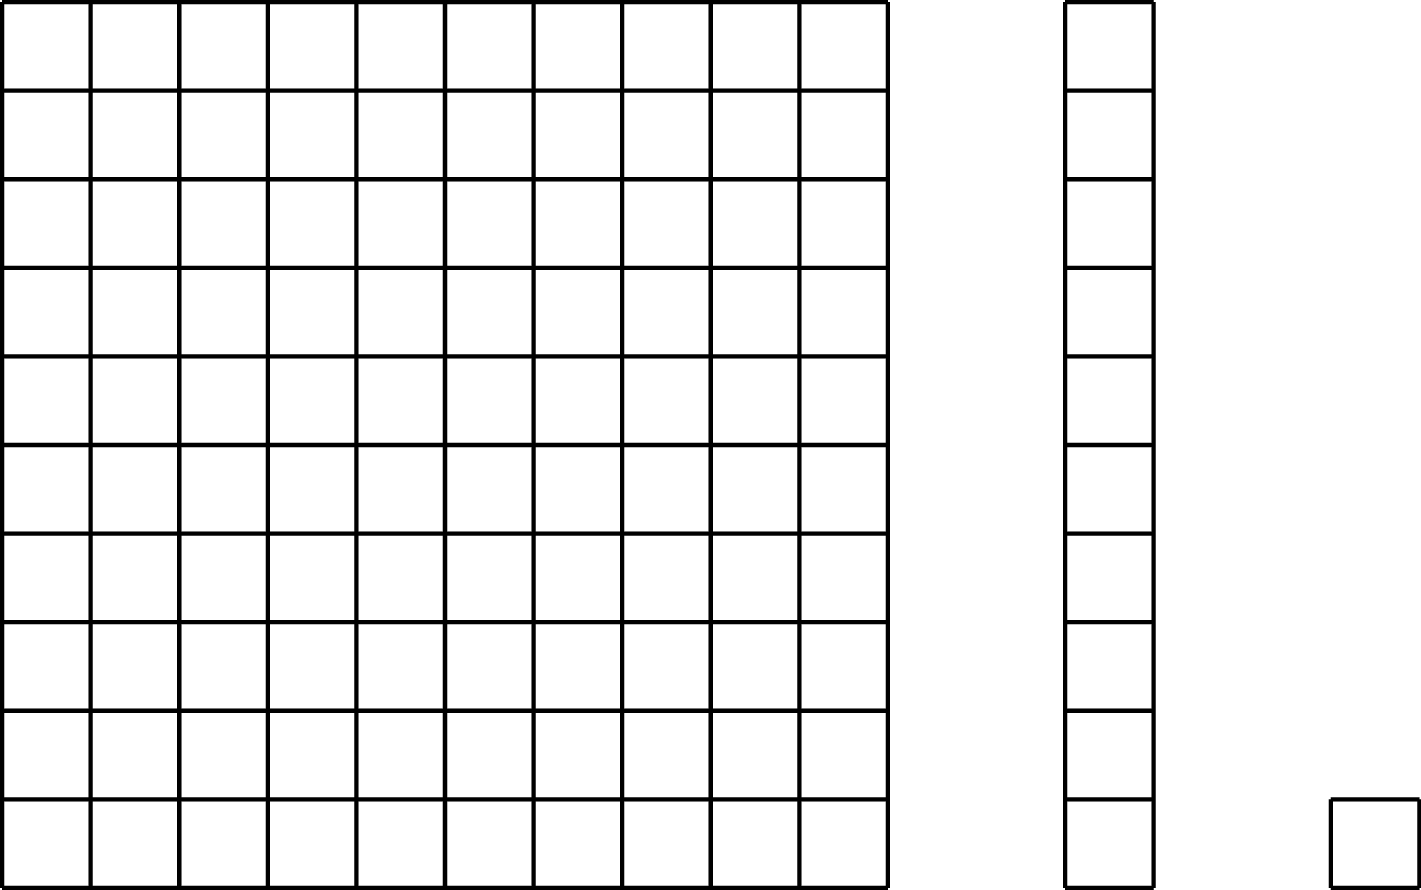 A diagram of a large square, a medium rectangle, and a small square. The medium rectangle is made up of 10 small squares aligned vertically. The large square is made up of 10 medium rectangles placed side by side.